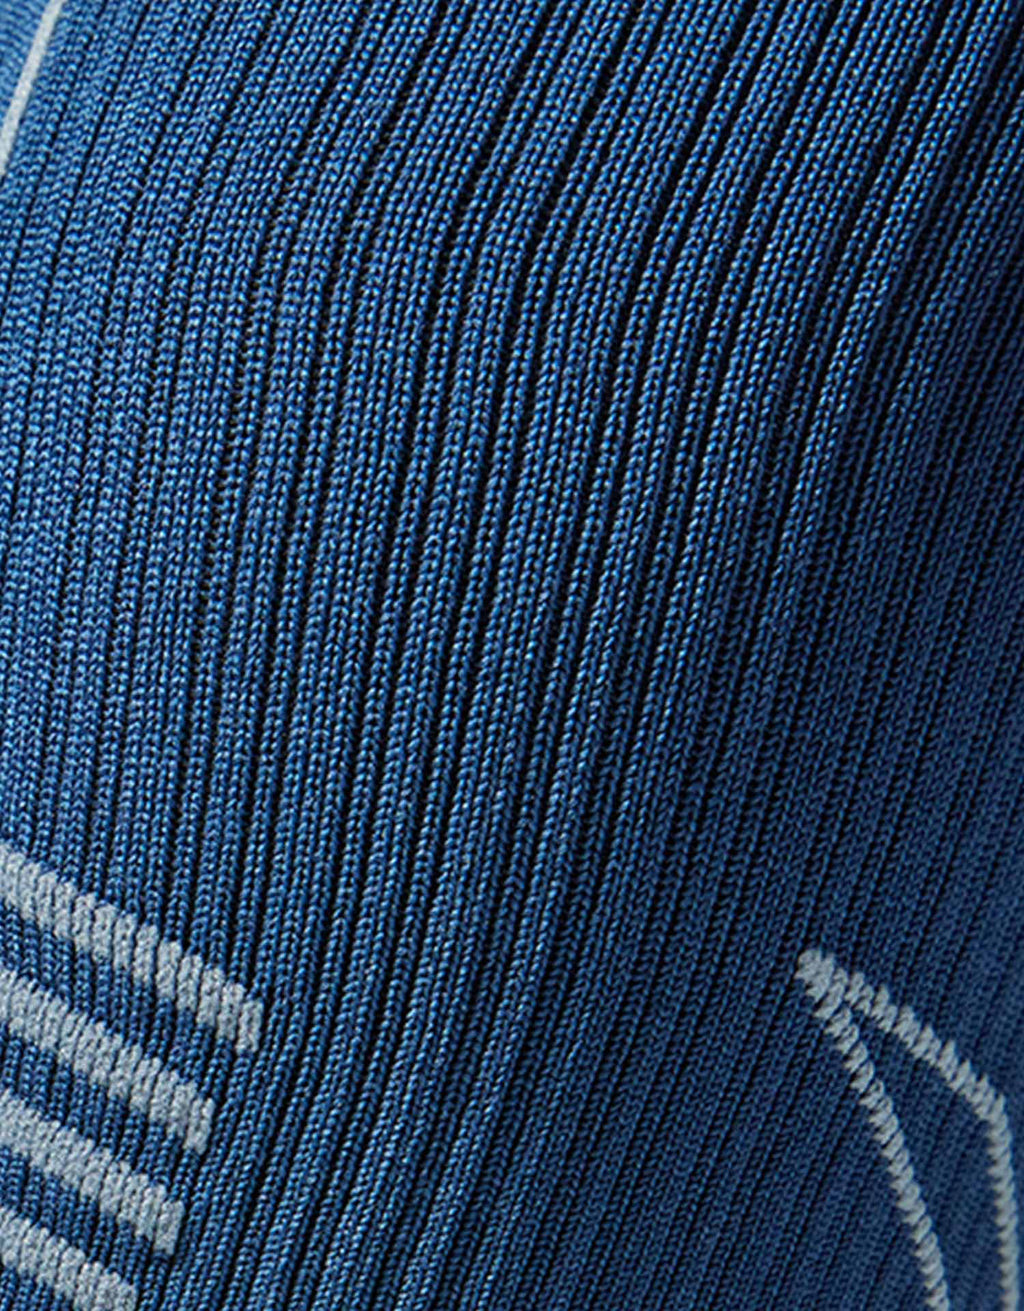 Blue yarn with gray details.